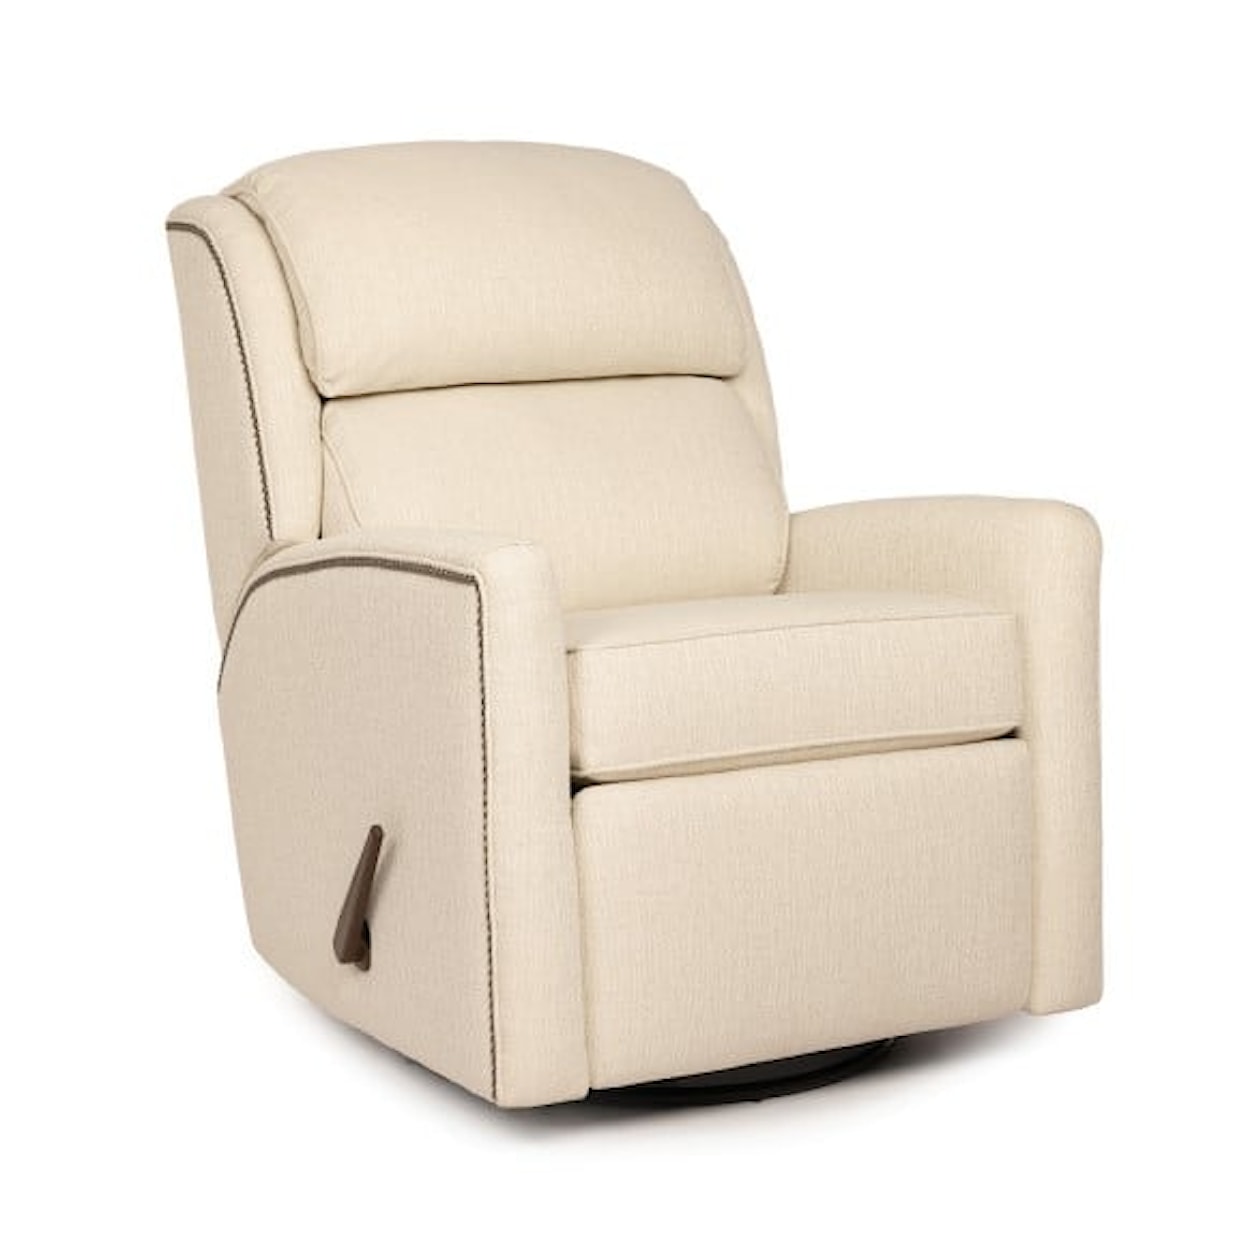 Smith Brothers 740 Swivel Glider Recliner